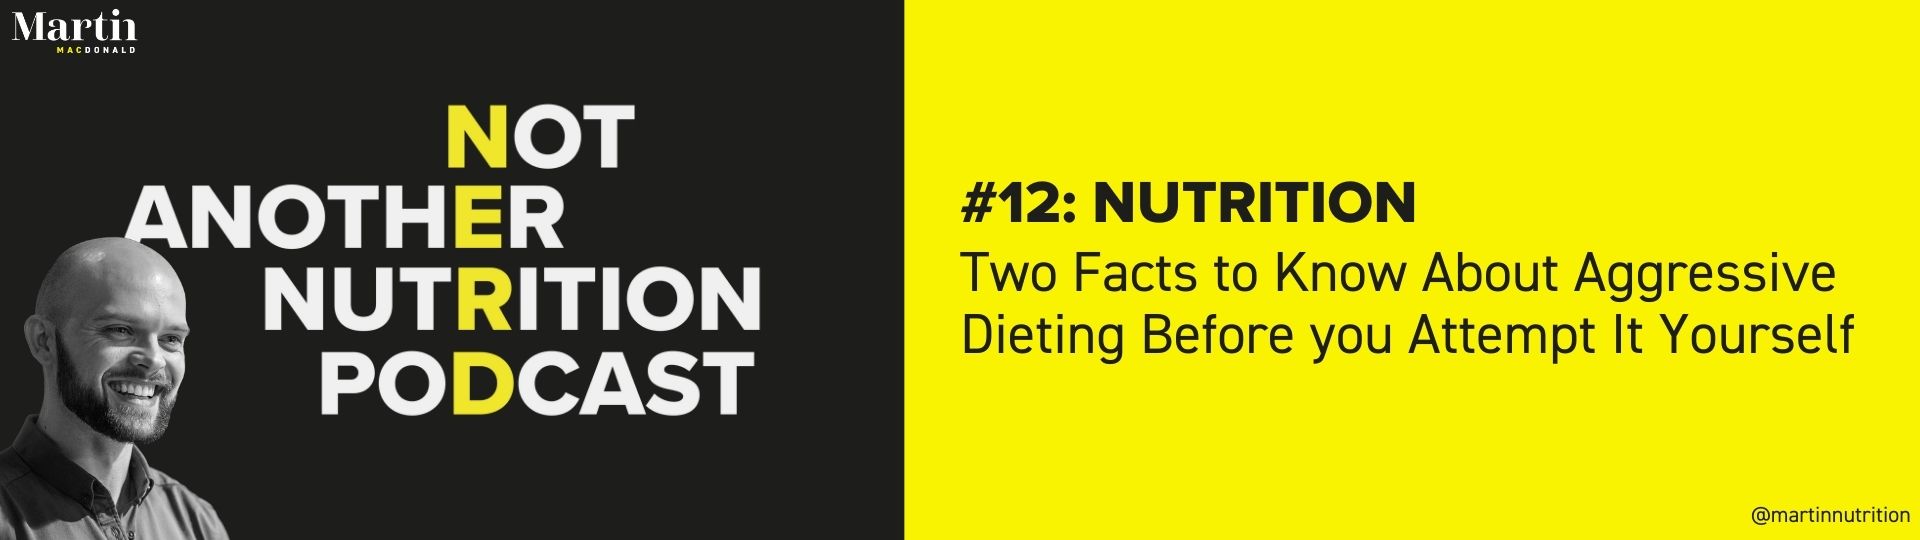 Two Facts to Know About Aggressive Dieting Before you Attempt It Yourself